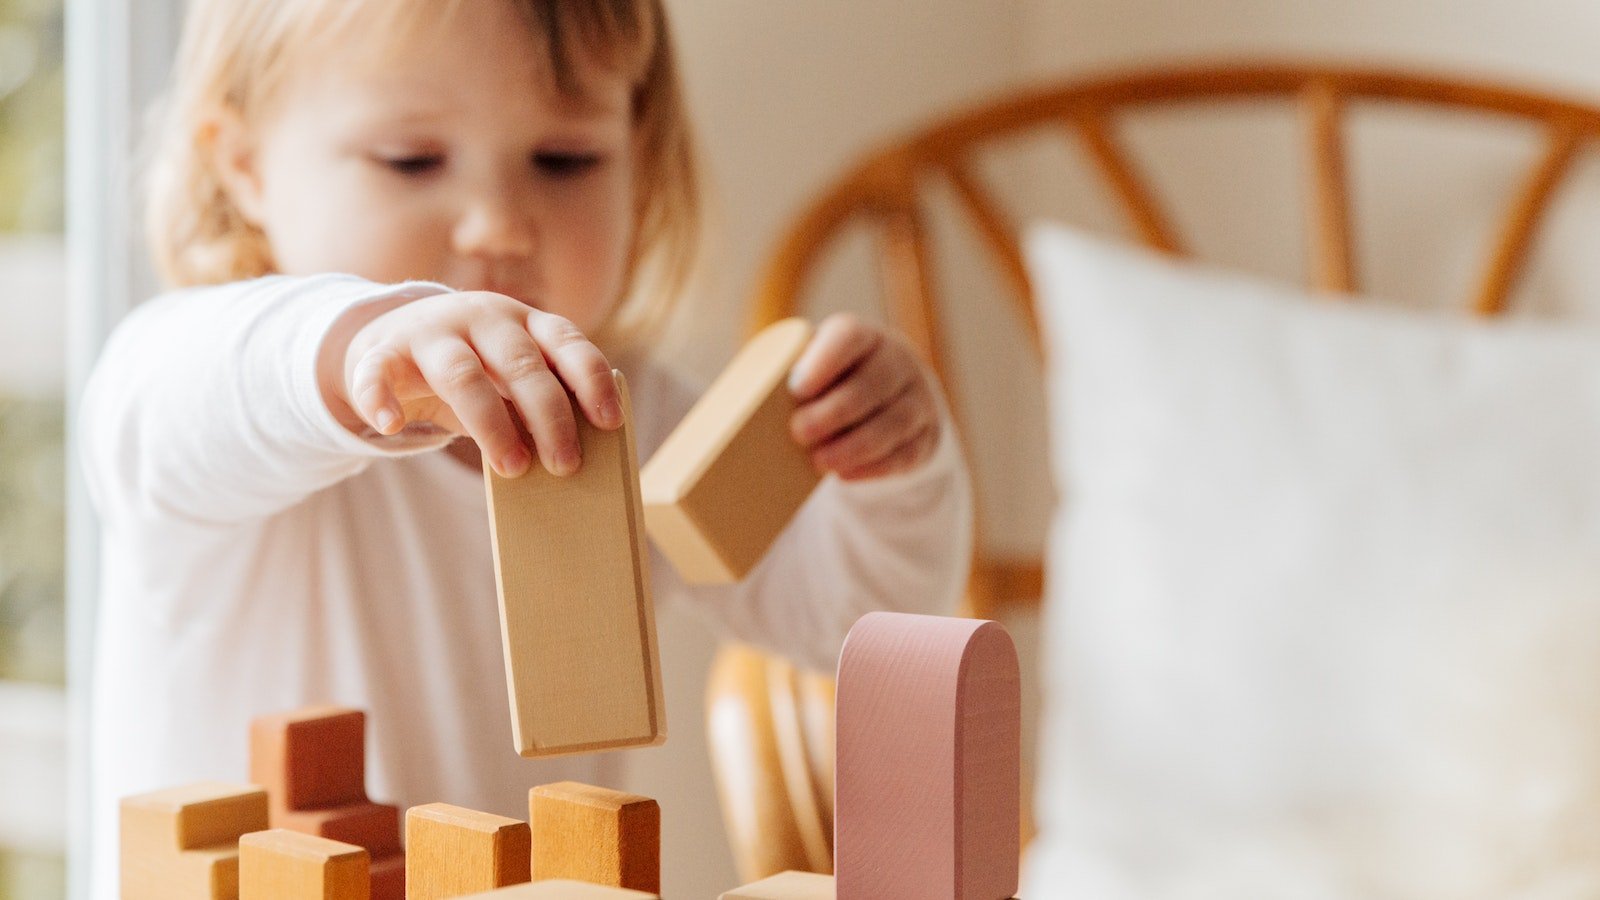 The Basic Concepts and Practices of the Montessori Method